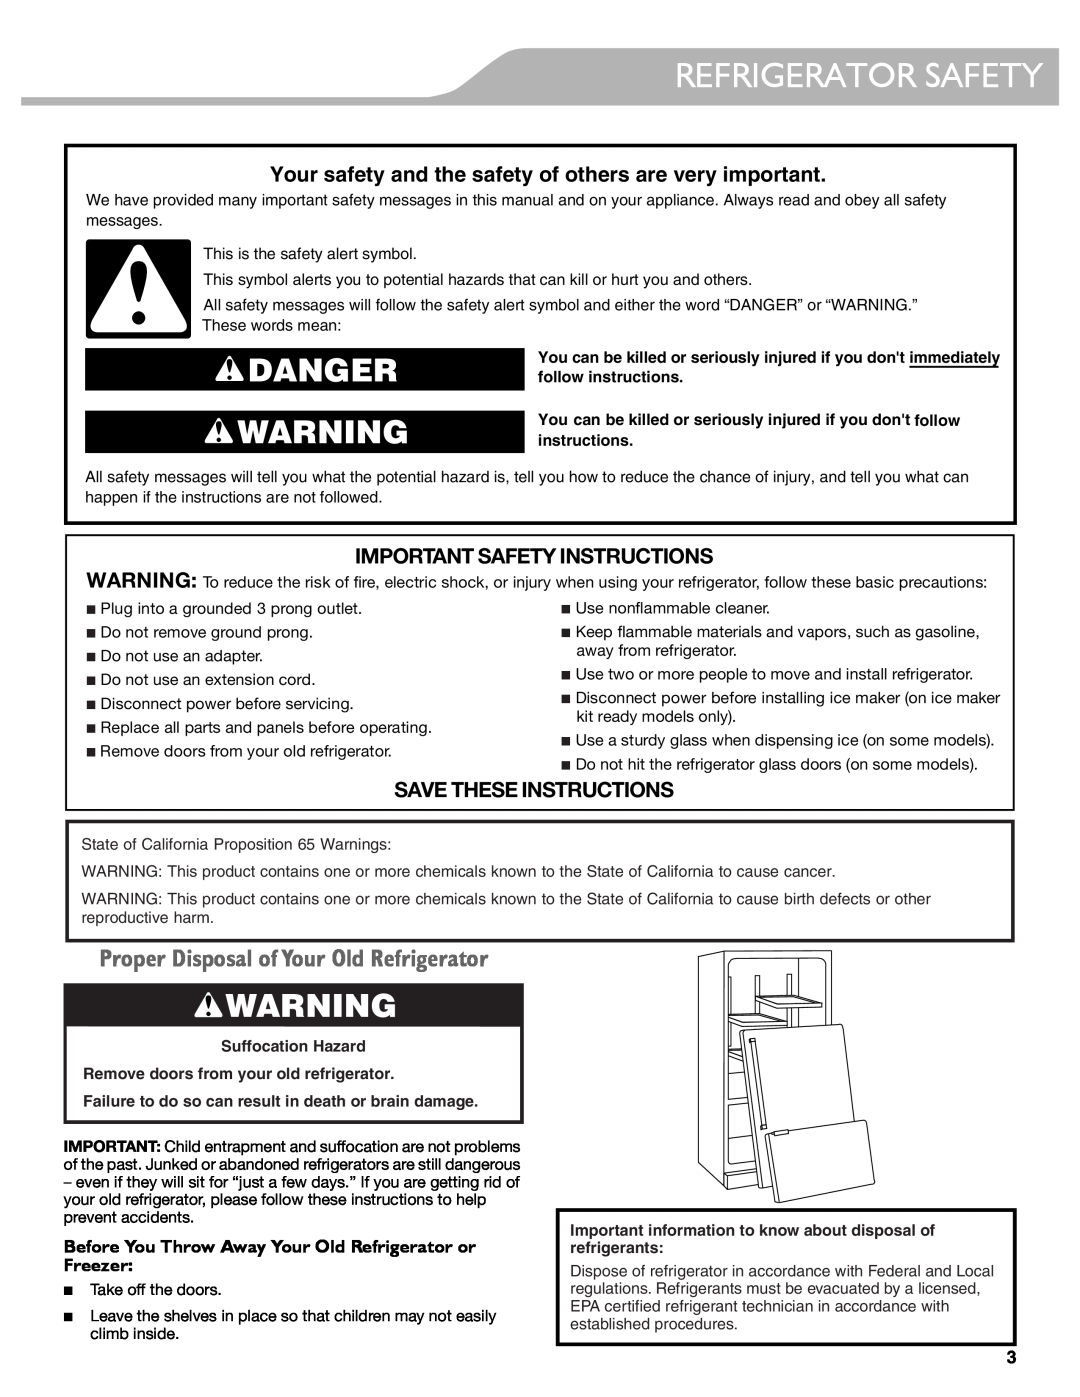 KitchenAid W10417002A manual Refrigerator Safety, Danger, Your safety and the safety of others are very important 